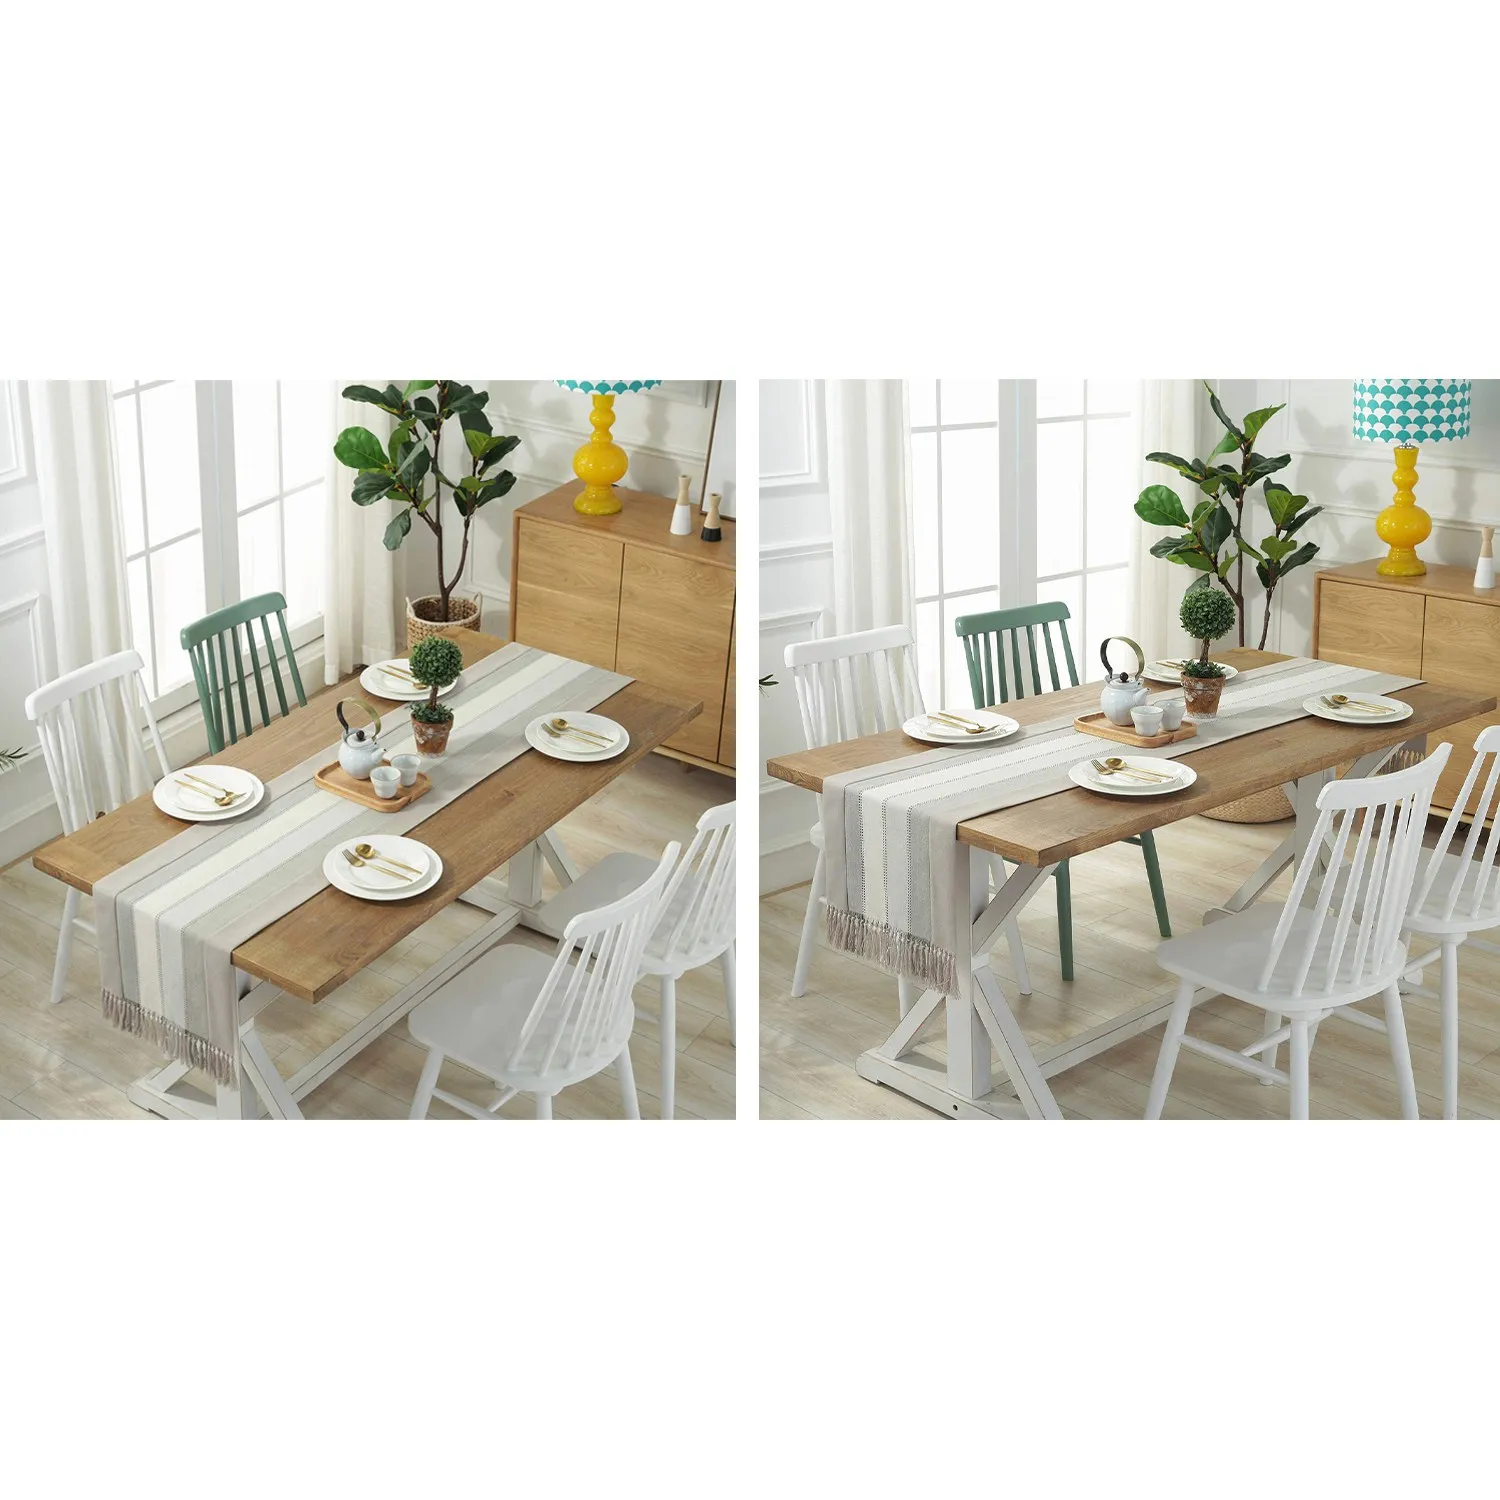 

Vertical Stripe Rustic Table Runner With Tassels Linen Cotton Coffee Dining Table Cloth Runners Long Non Slip